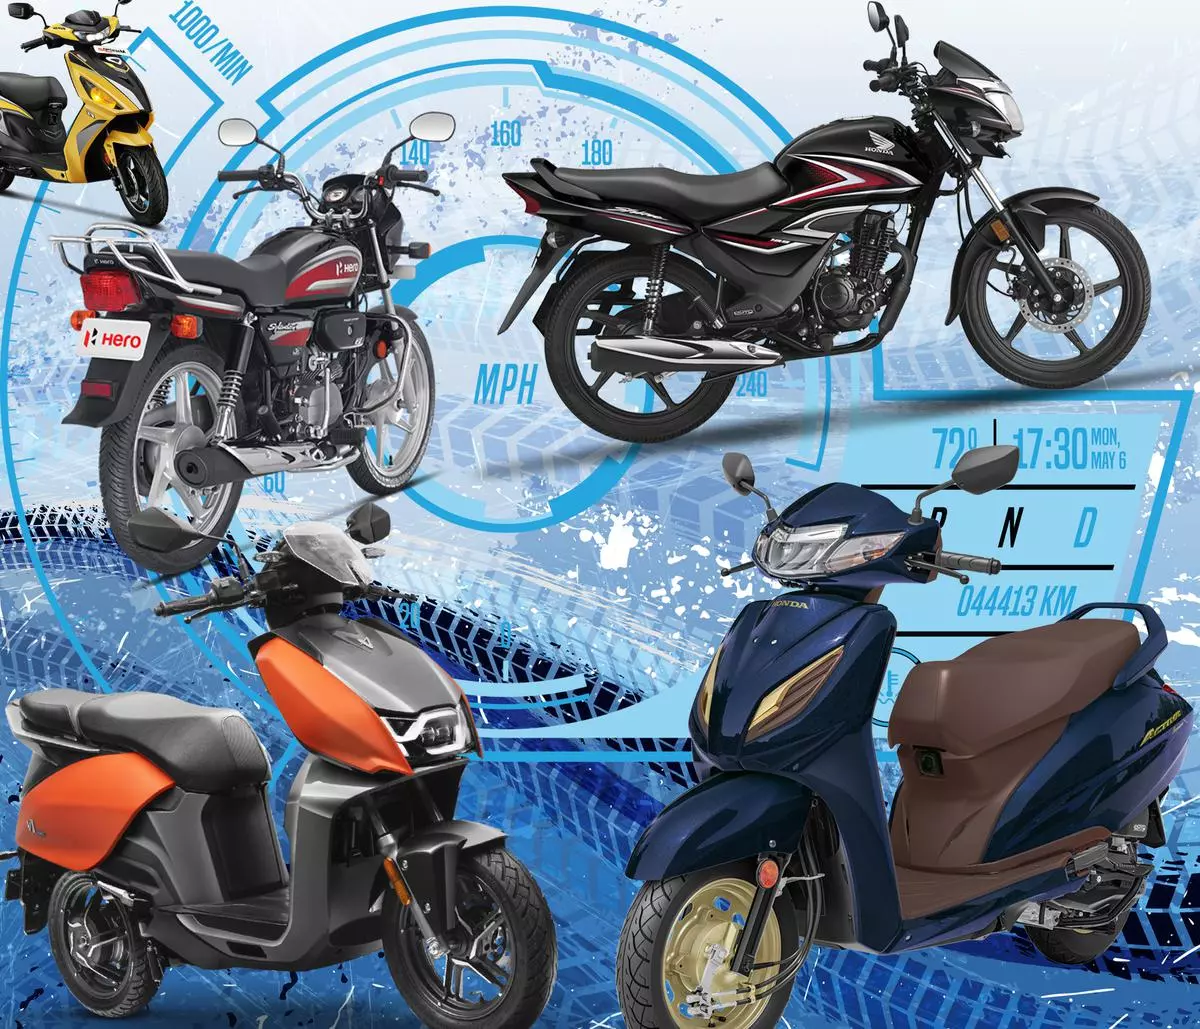 Tug of war: With Honda and Hero having their own plans for the two-wheeler market, the leadership battle is truly on